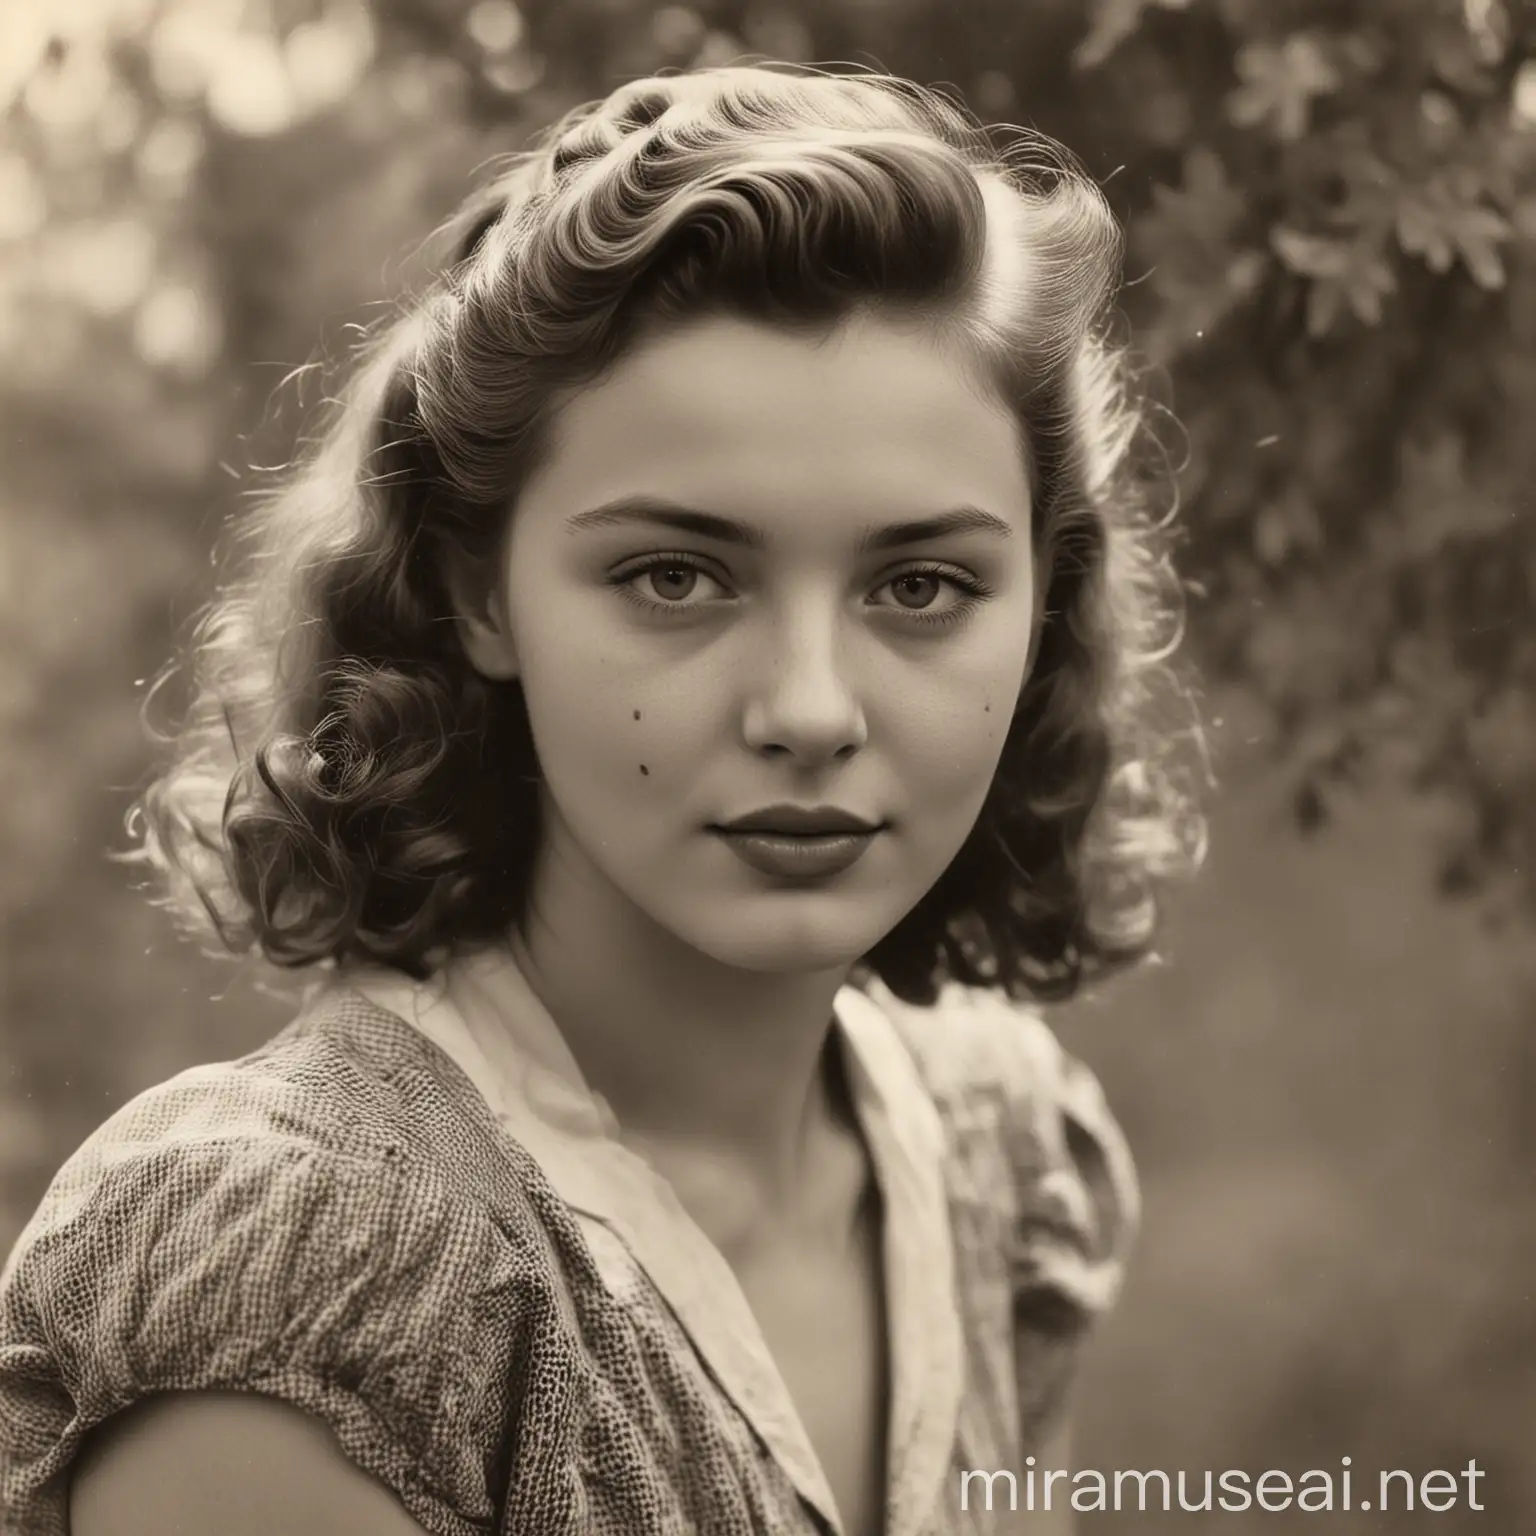 Stunning Vintage Portrait of a Young Woman in the 1940s